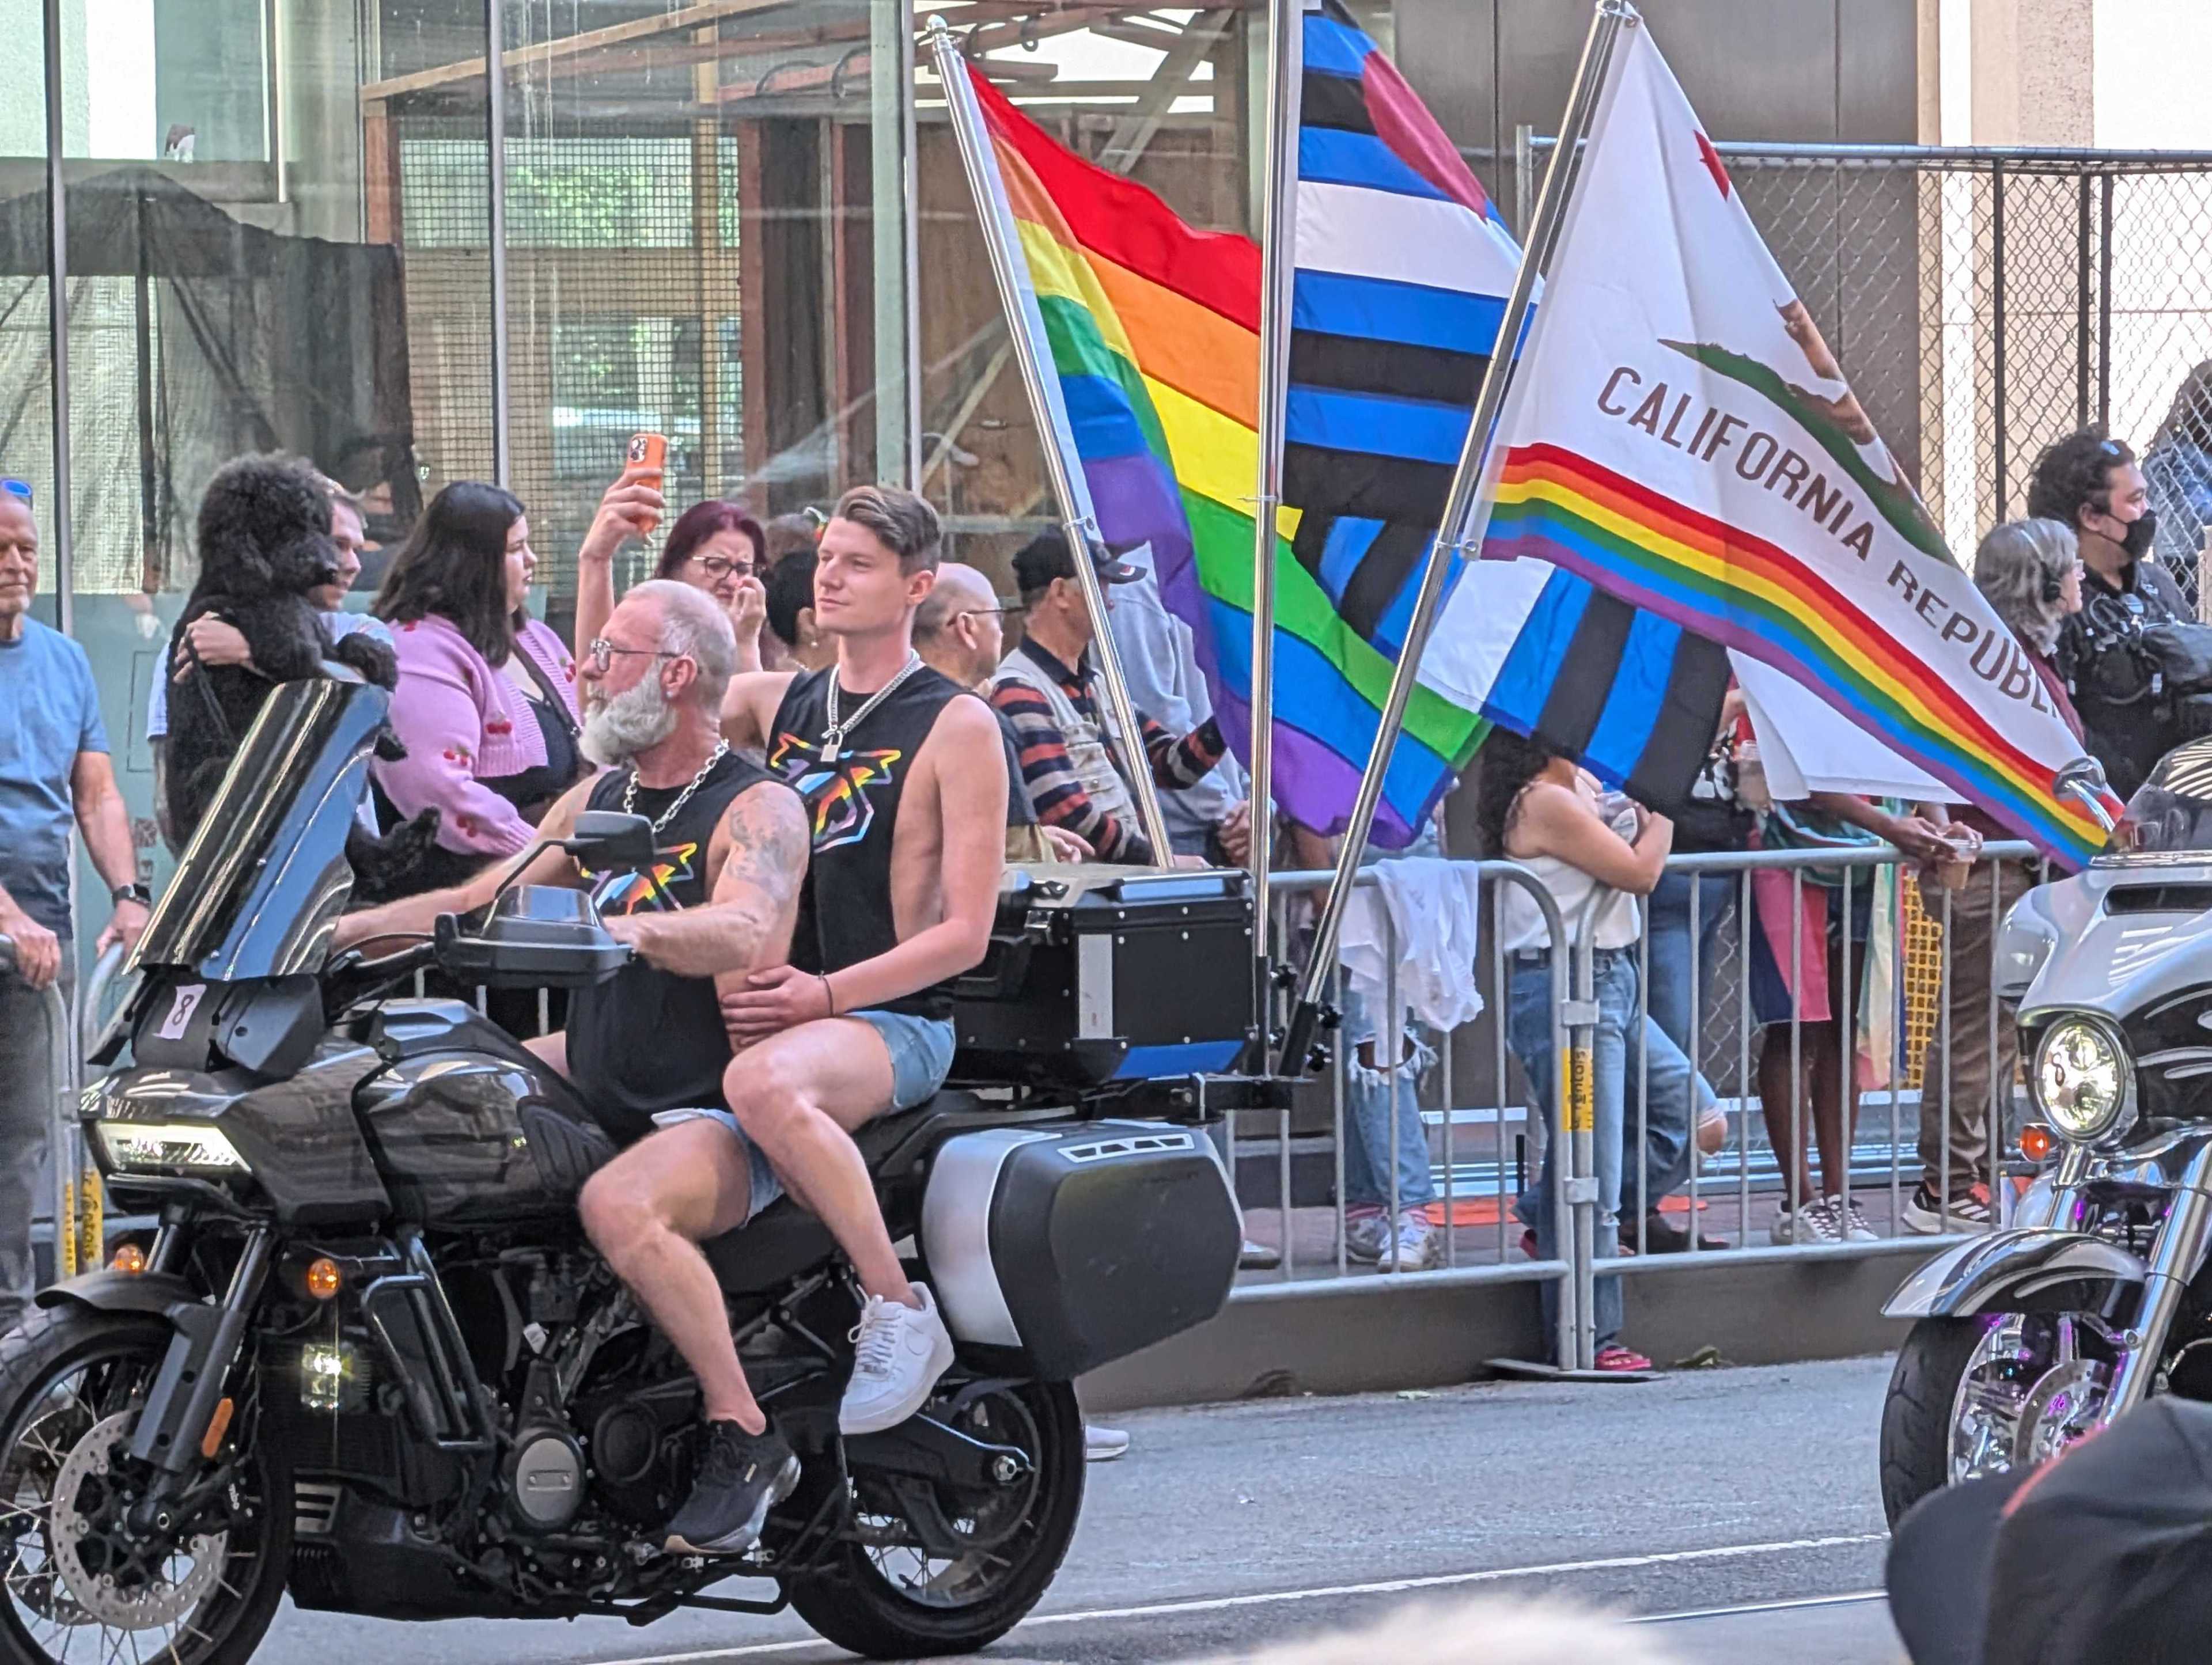 Two people on a motorcycle ride in a parade, wearing matching black shirts. Behind them, a crowd holds various colorful pride flags and the California Republic flag.